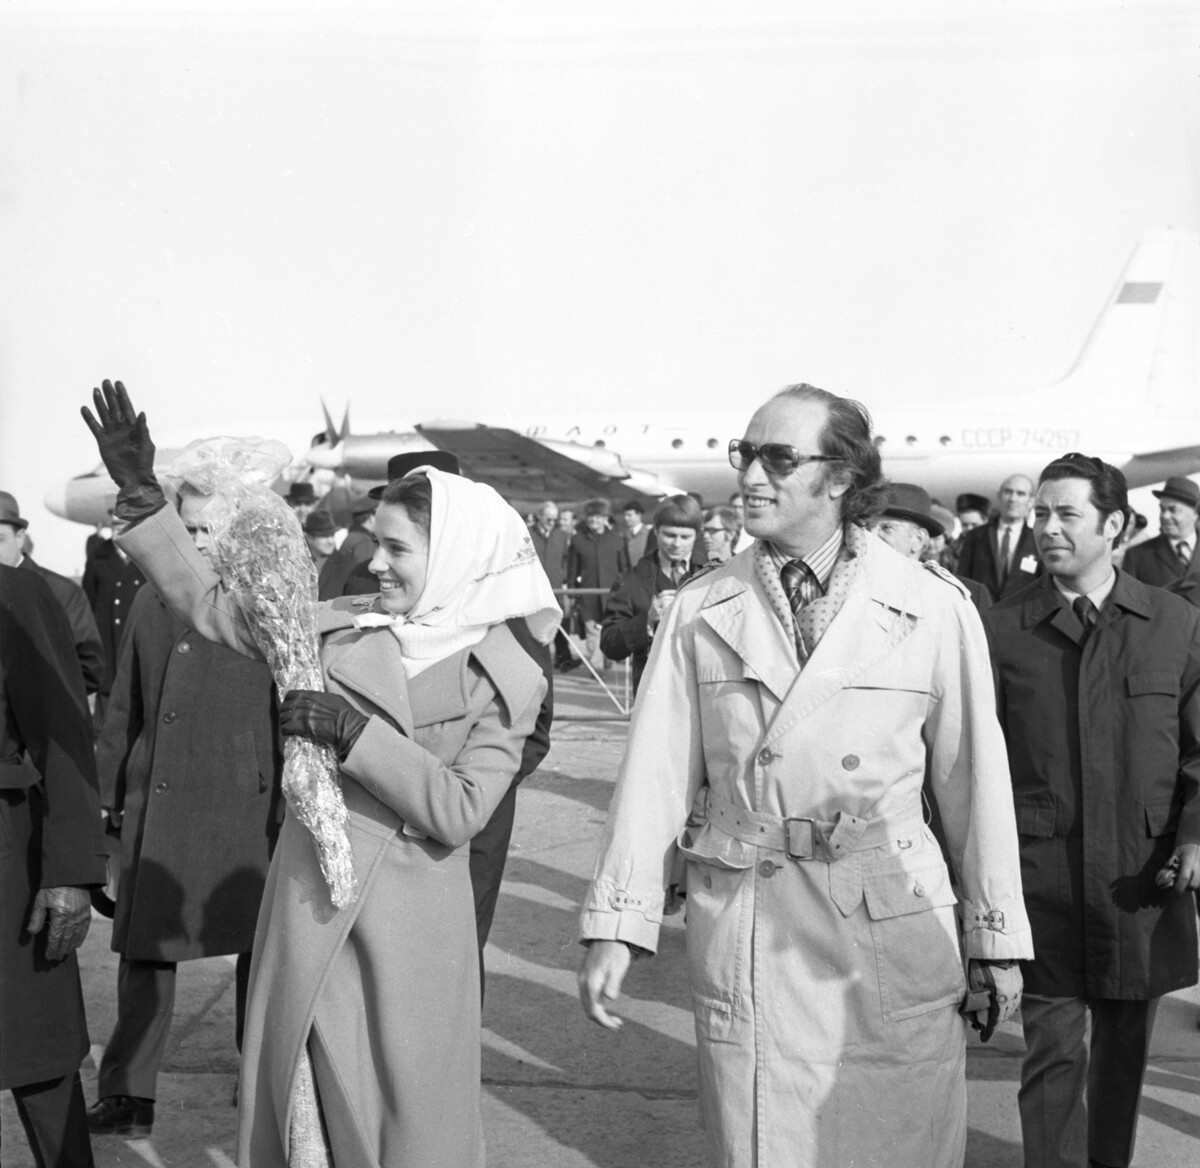 Canadian Prime Minister Pierre Trudeau and his wife Margaret at the airport in Norilsk, 1971.